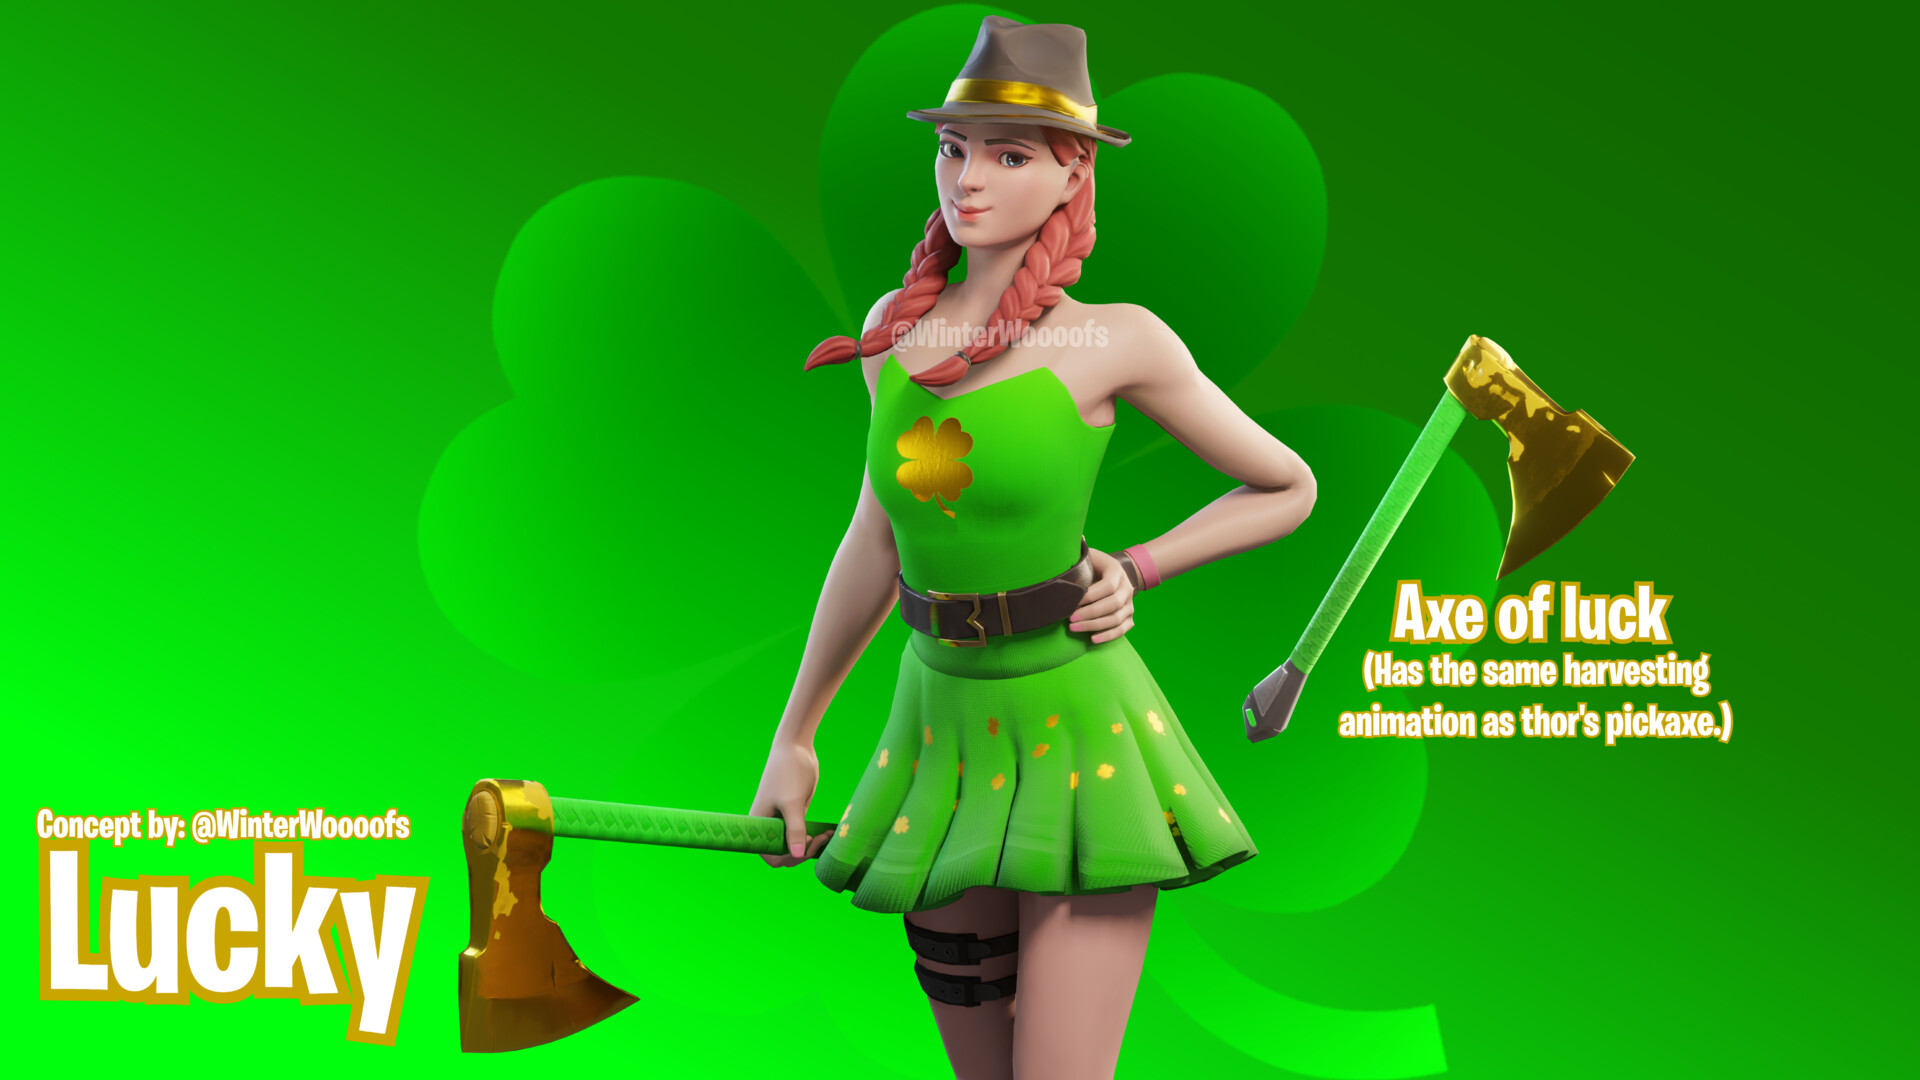 Lucky features a fashionable green dress with a gold clover design to match...